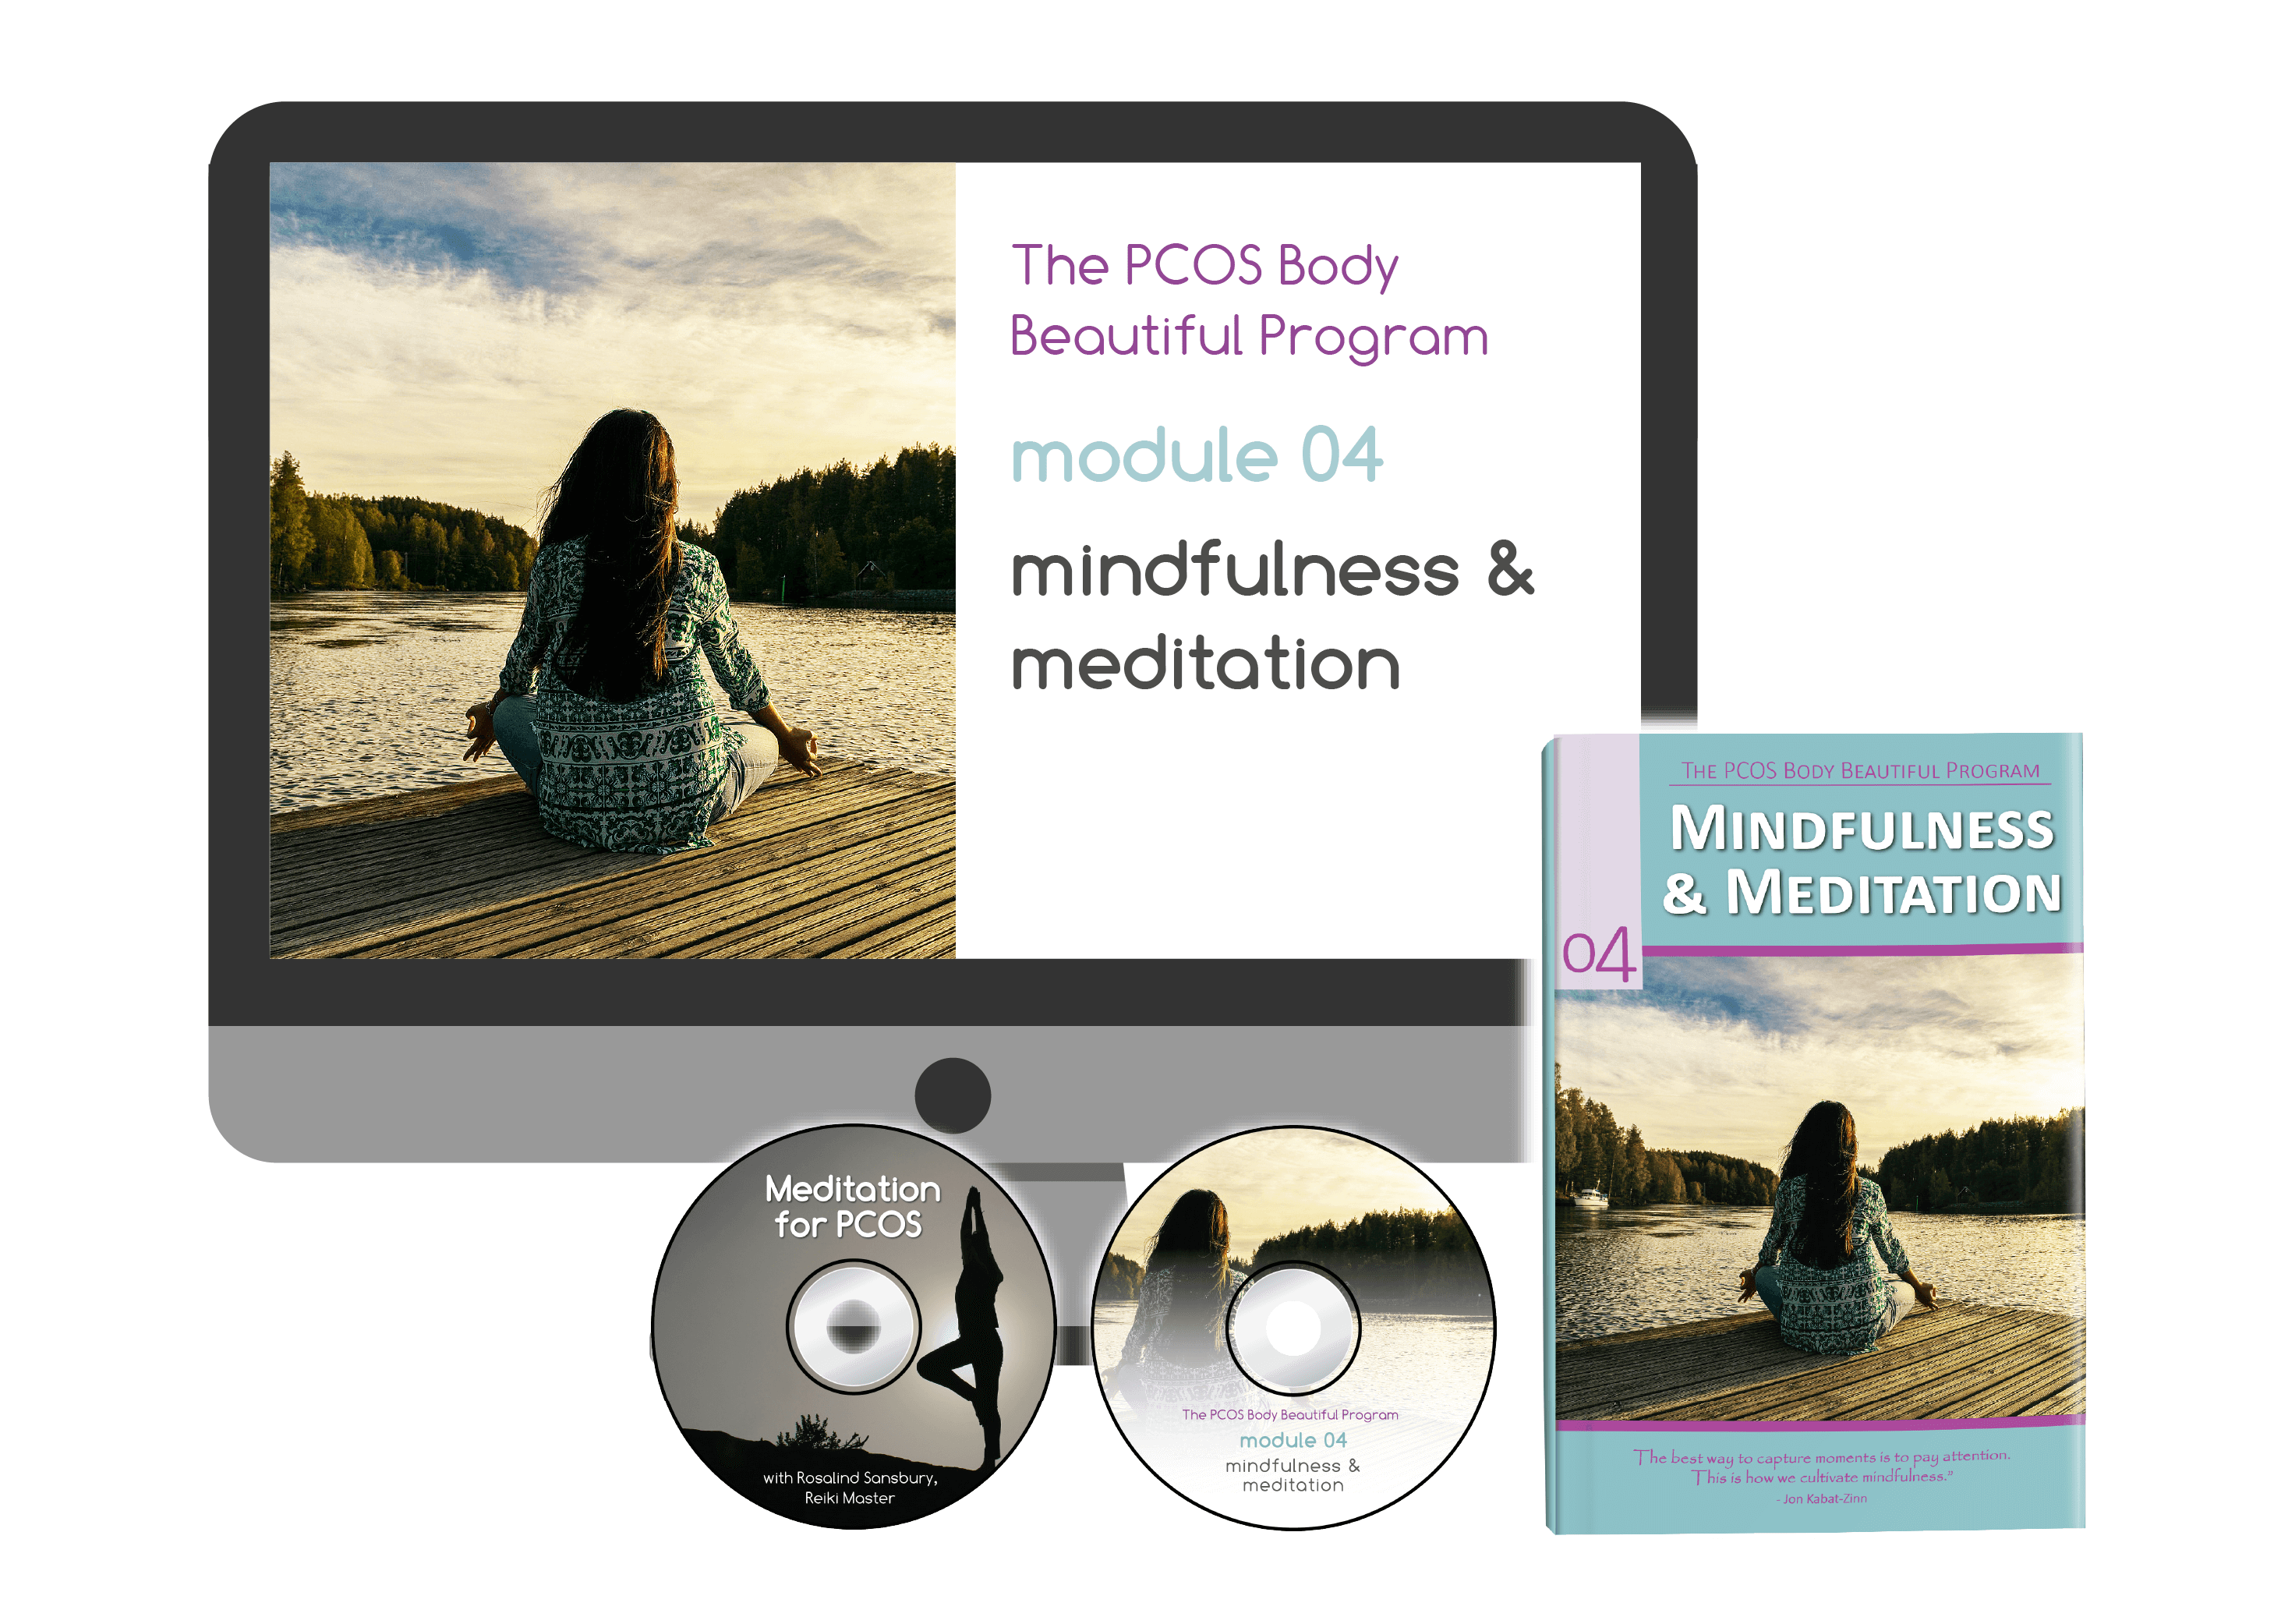 Mindfulness and meditation in PCOS program